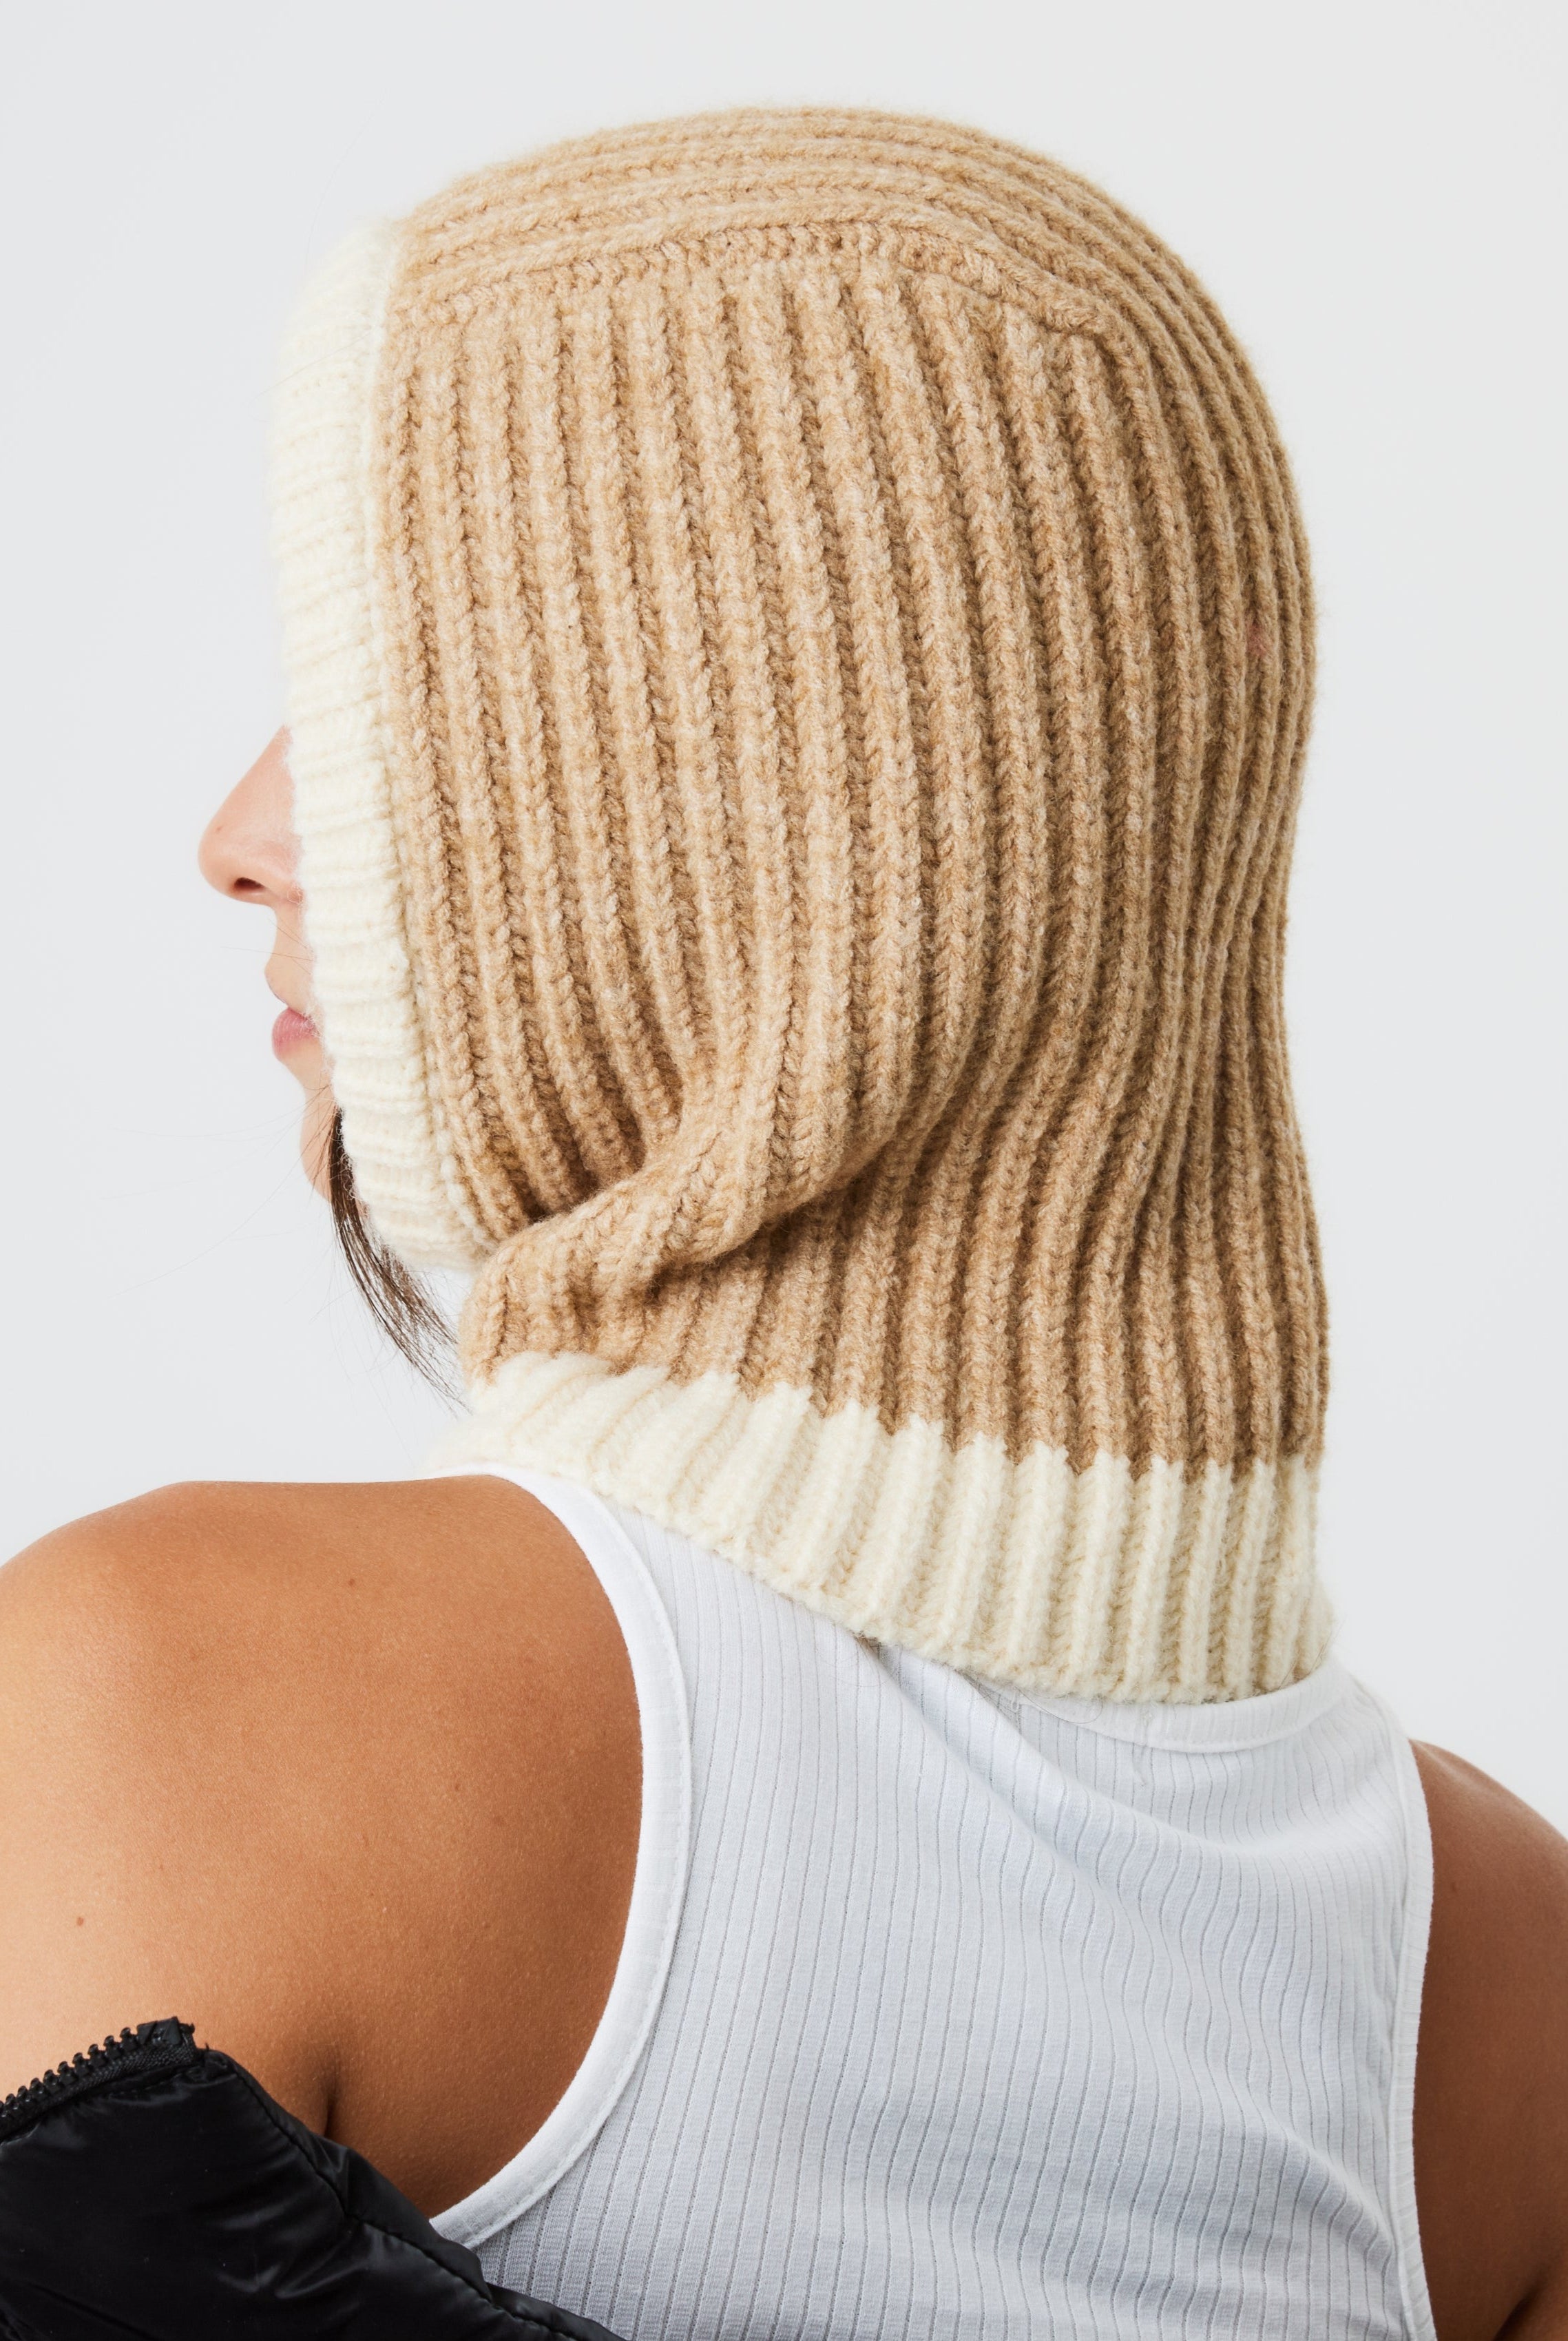 Loose Fit Ribbed Knit Balaclava in Beige | knitted | knitwear | ski | Skiing | Winter | Autumn | Plaza core | Winter Accessories | Autumn Accessories |  